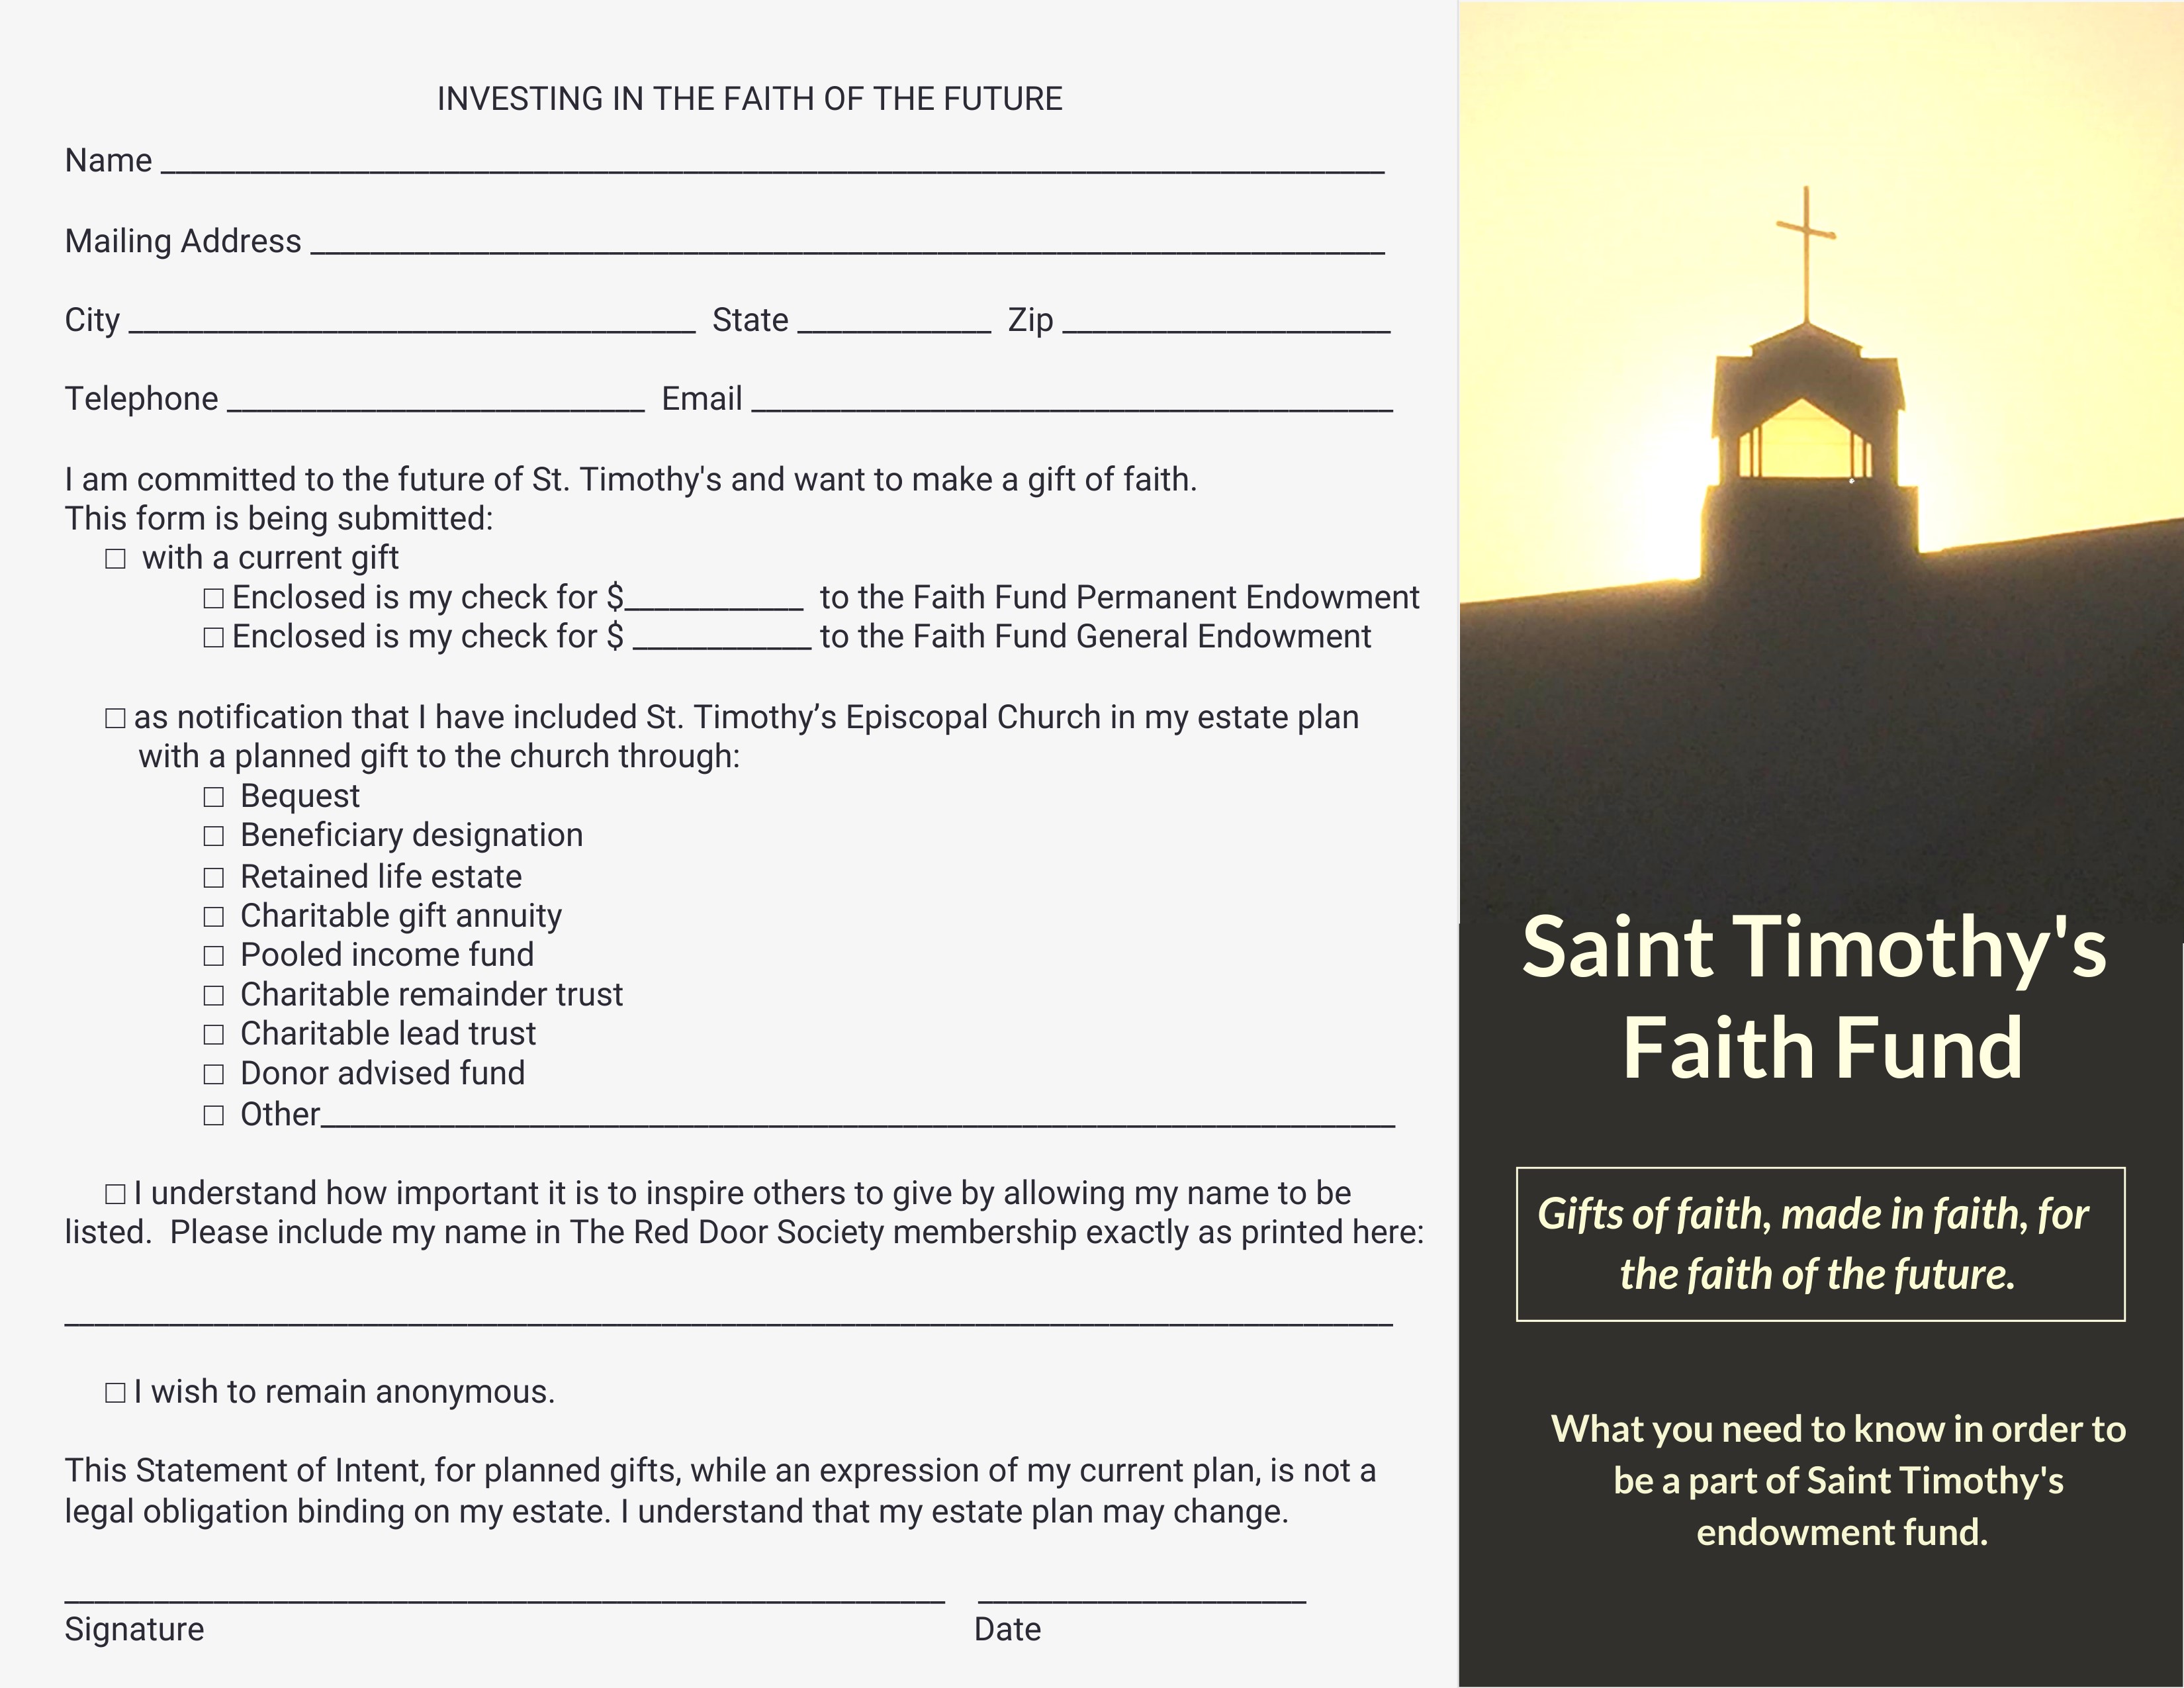 faith-fund-trifold-front_372